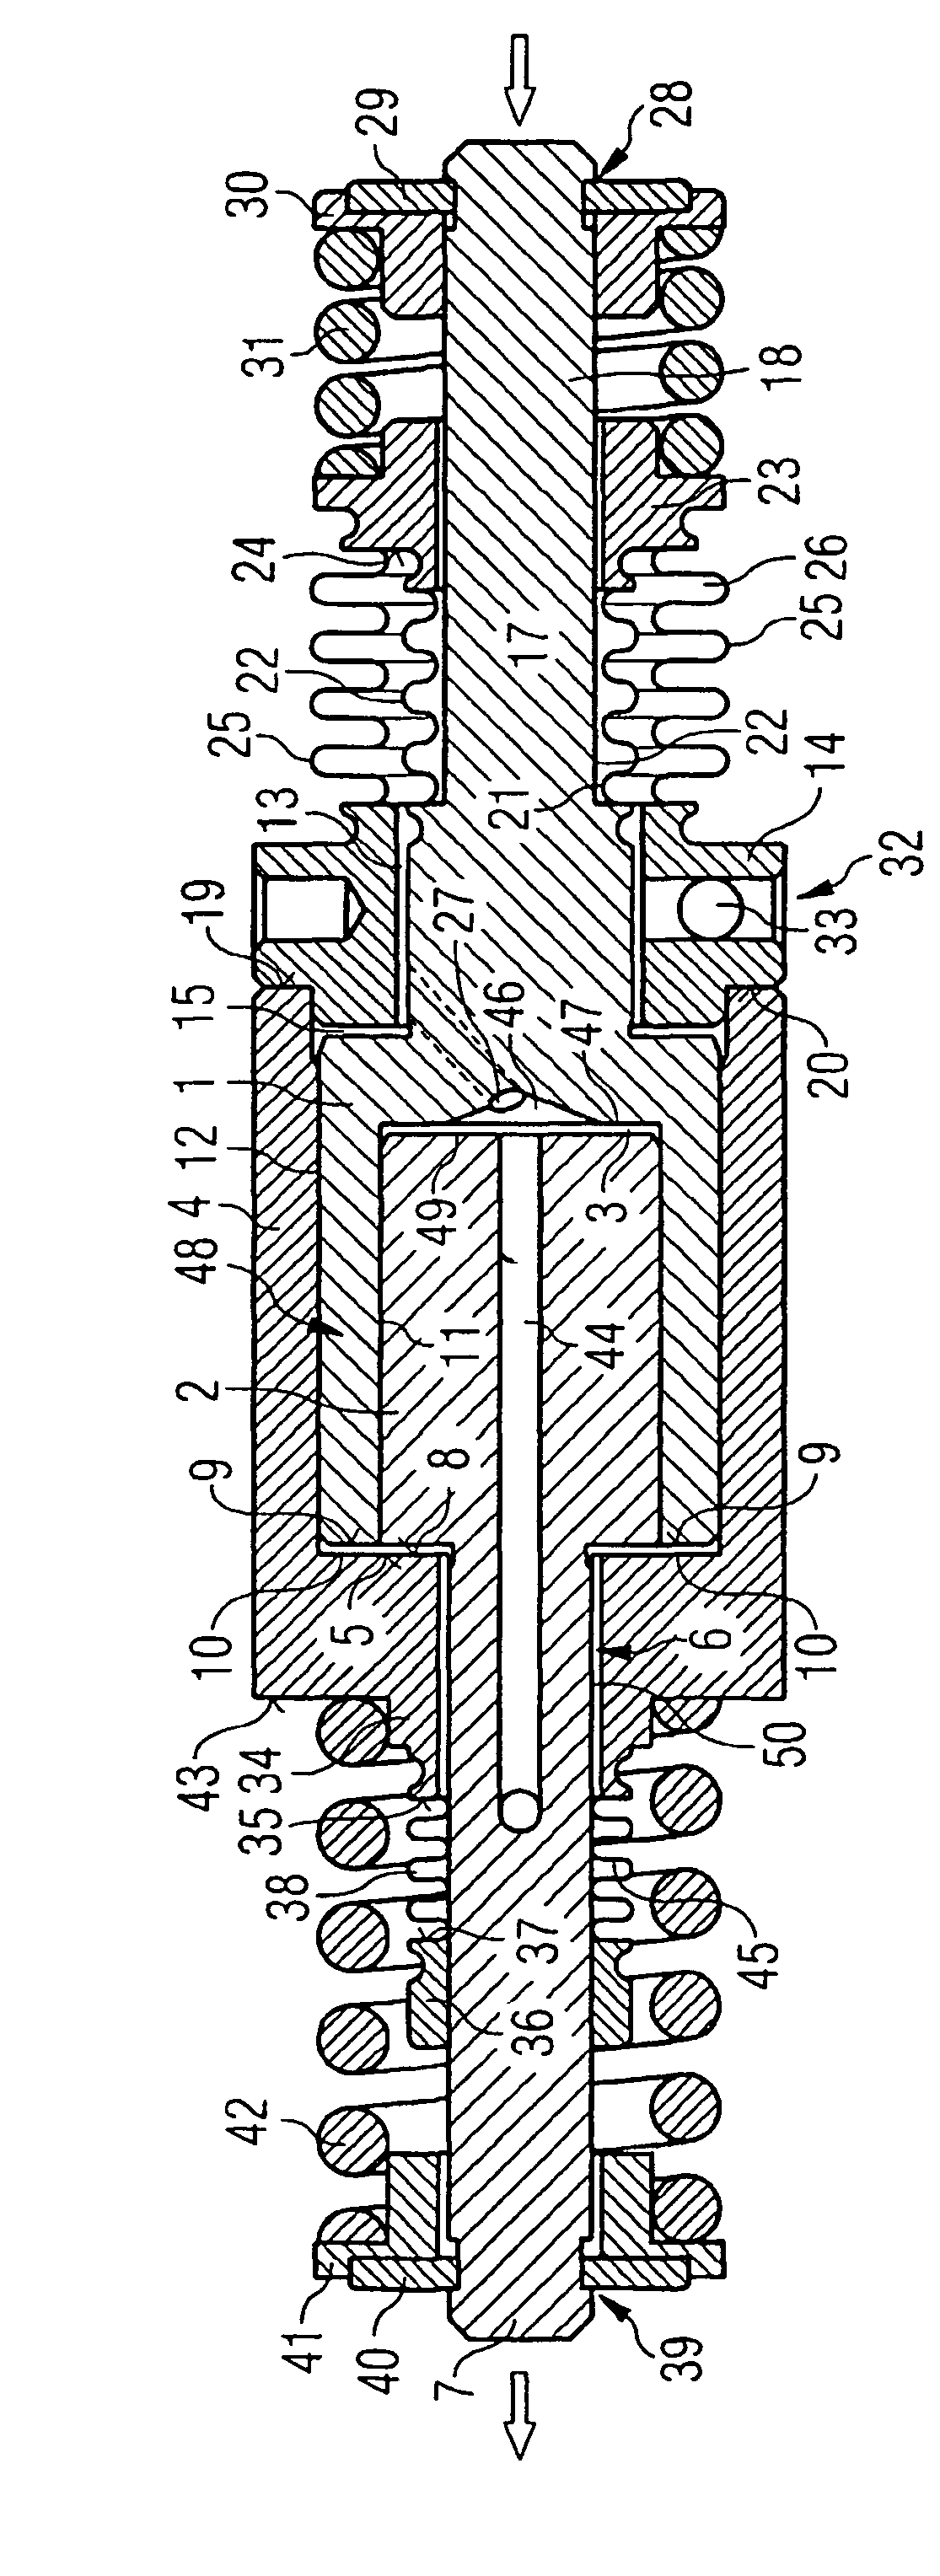 Device for the translation of a displacement of an actuator, in particular for an injection valve